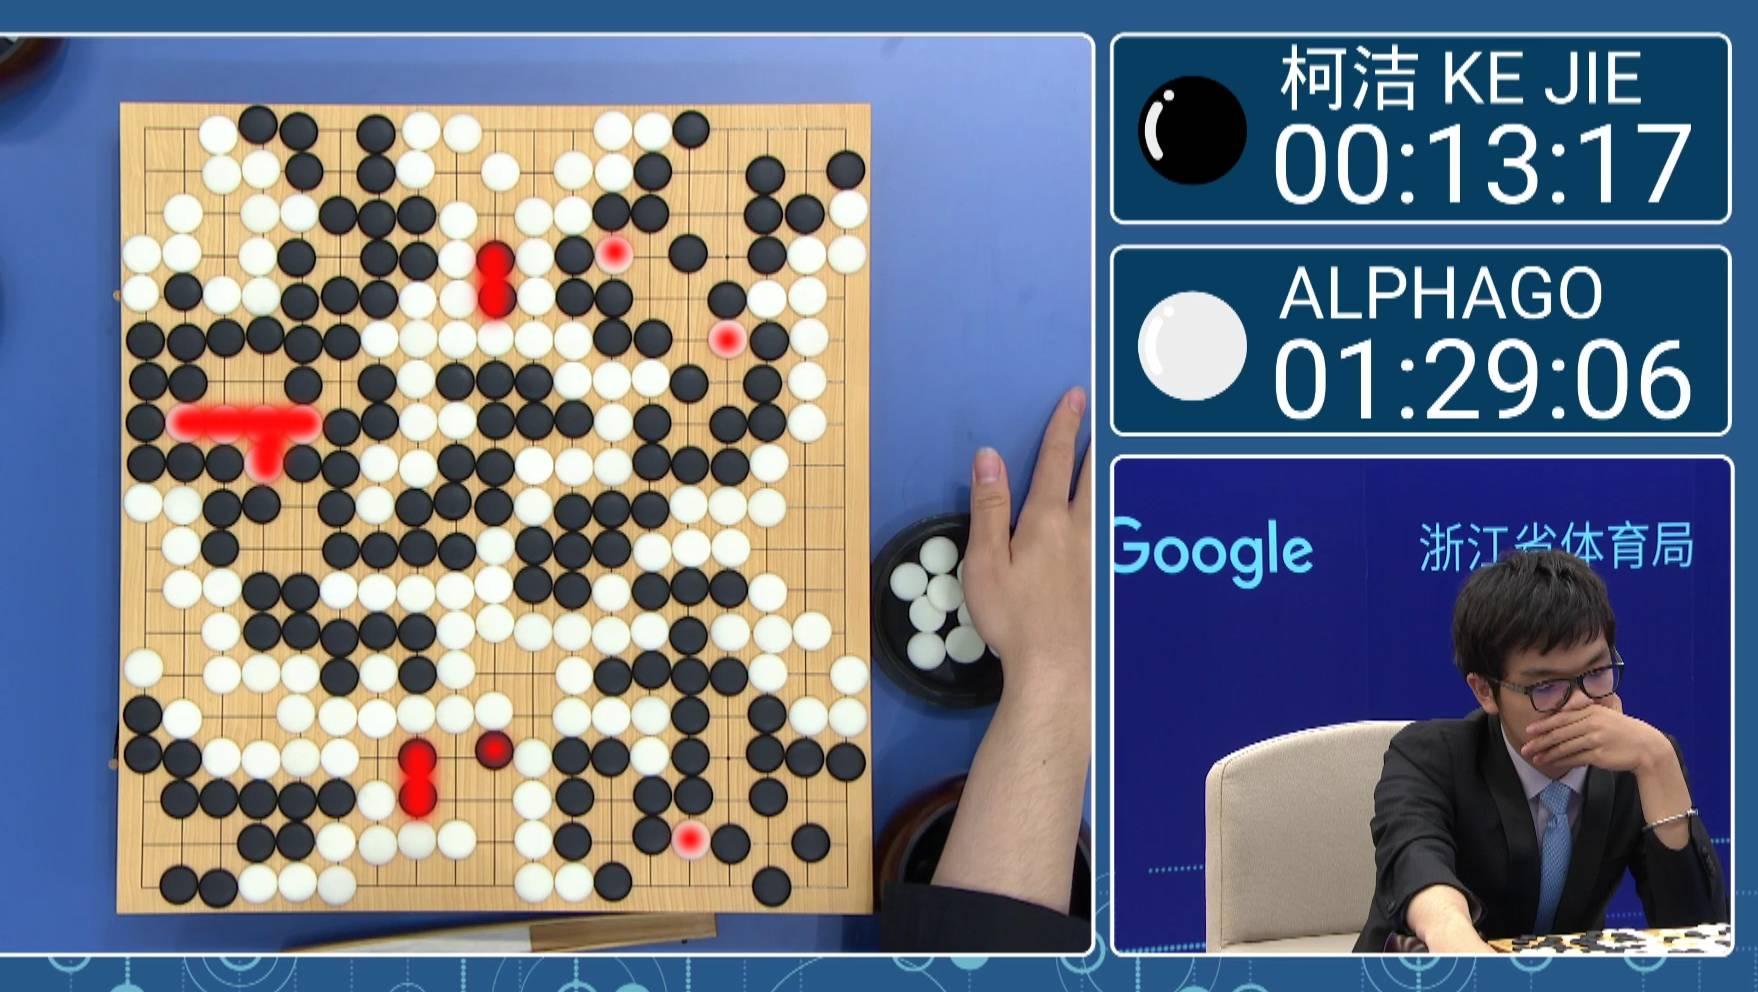 How DeepMind’s AlphaGo Became the World’s Top Go Player